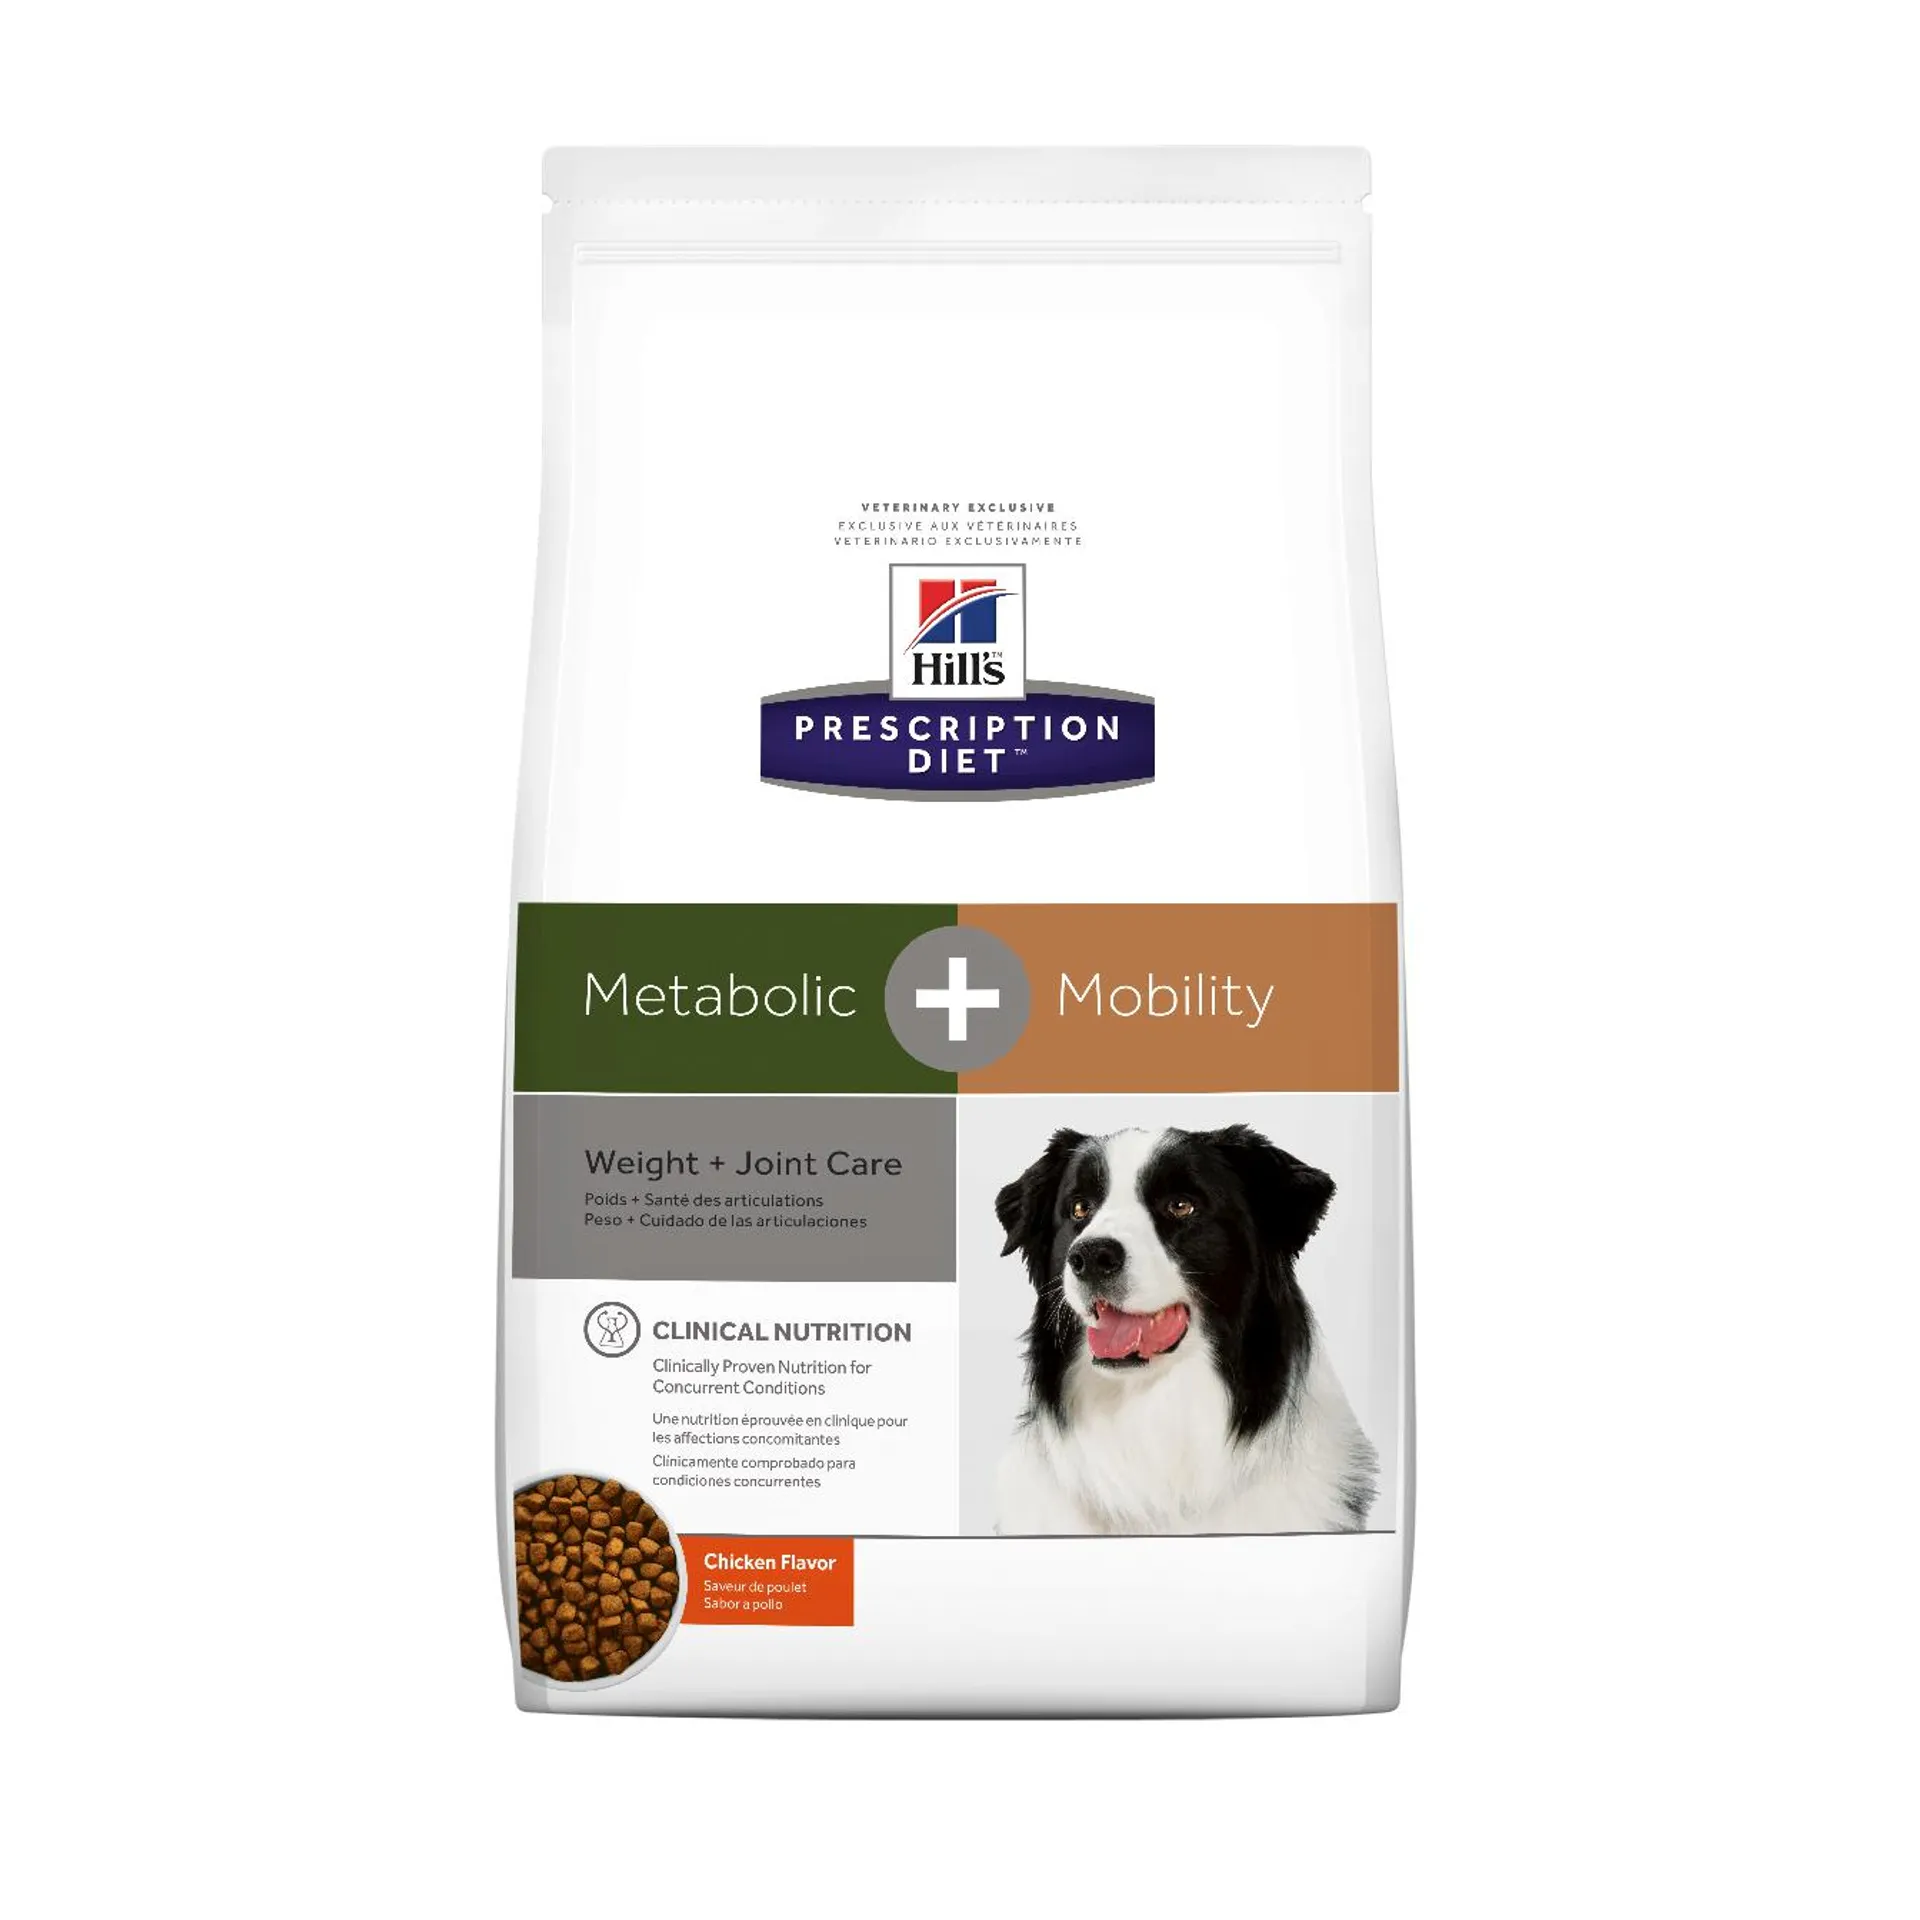 Hill's Prescription Diet Metabolic + Mobility Chicken Dry Dog Food